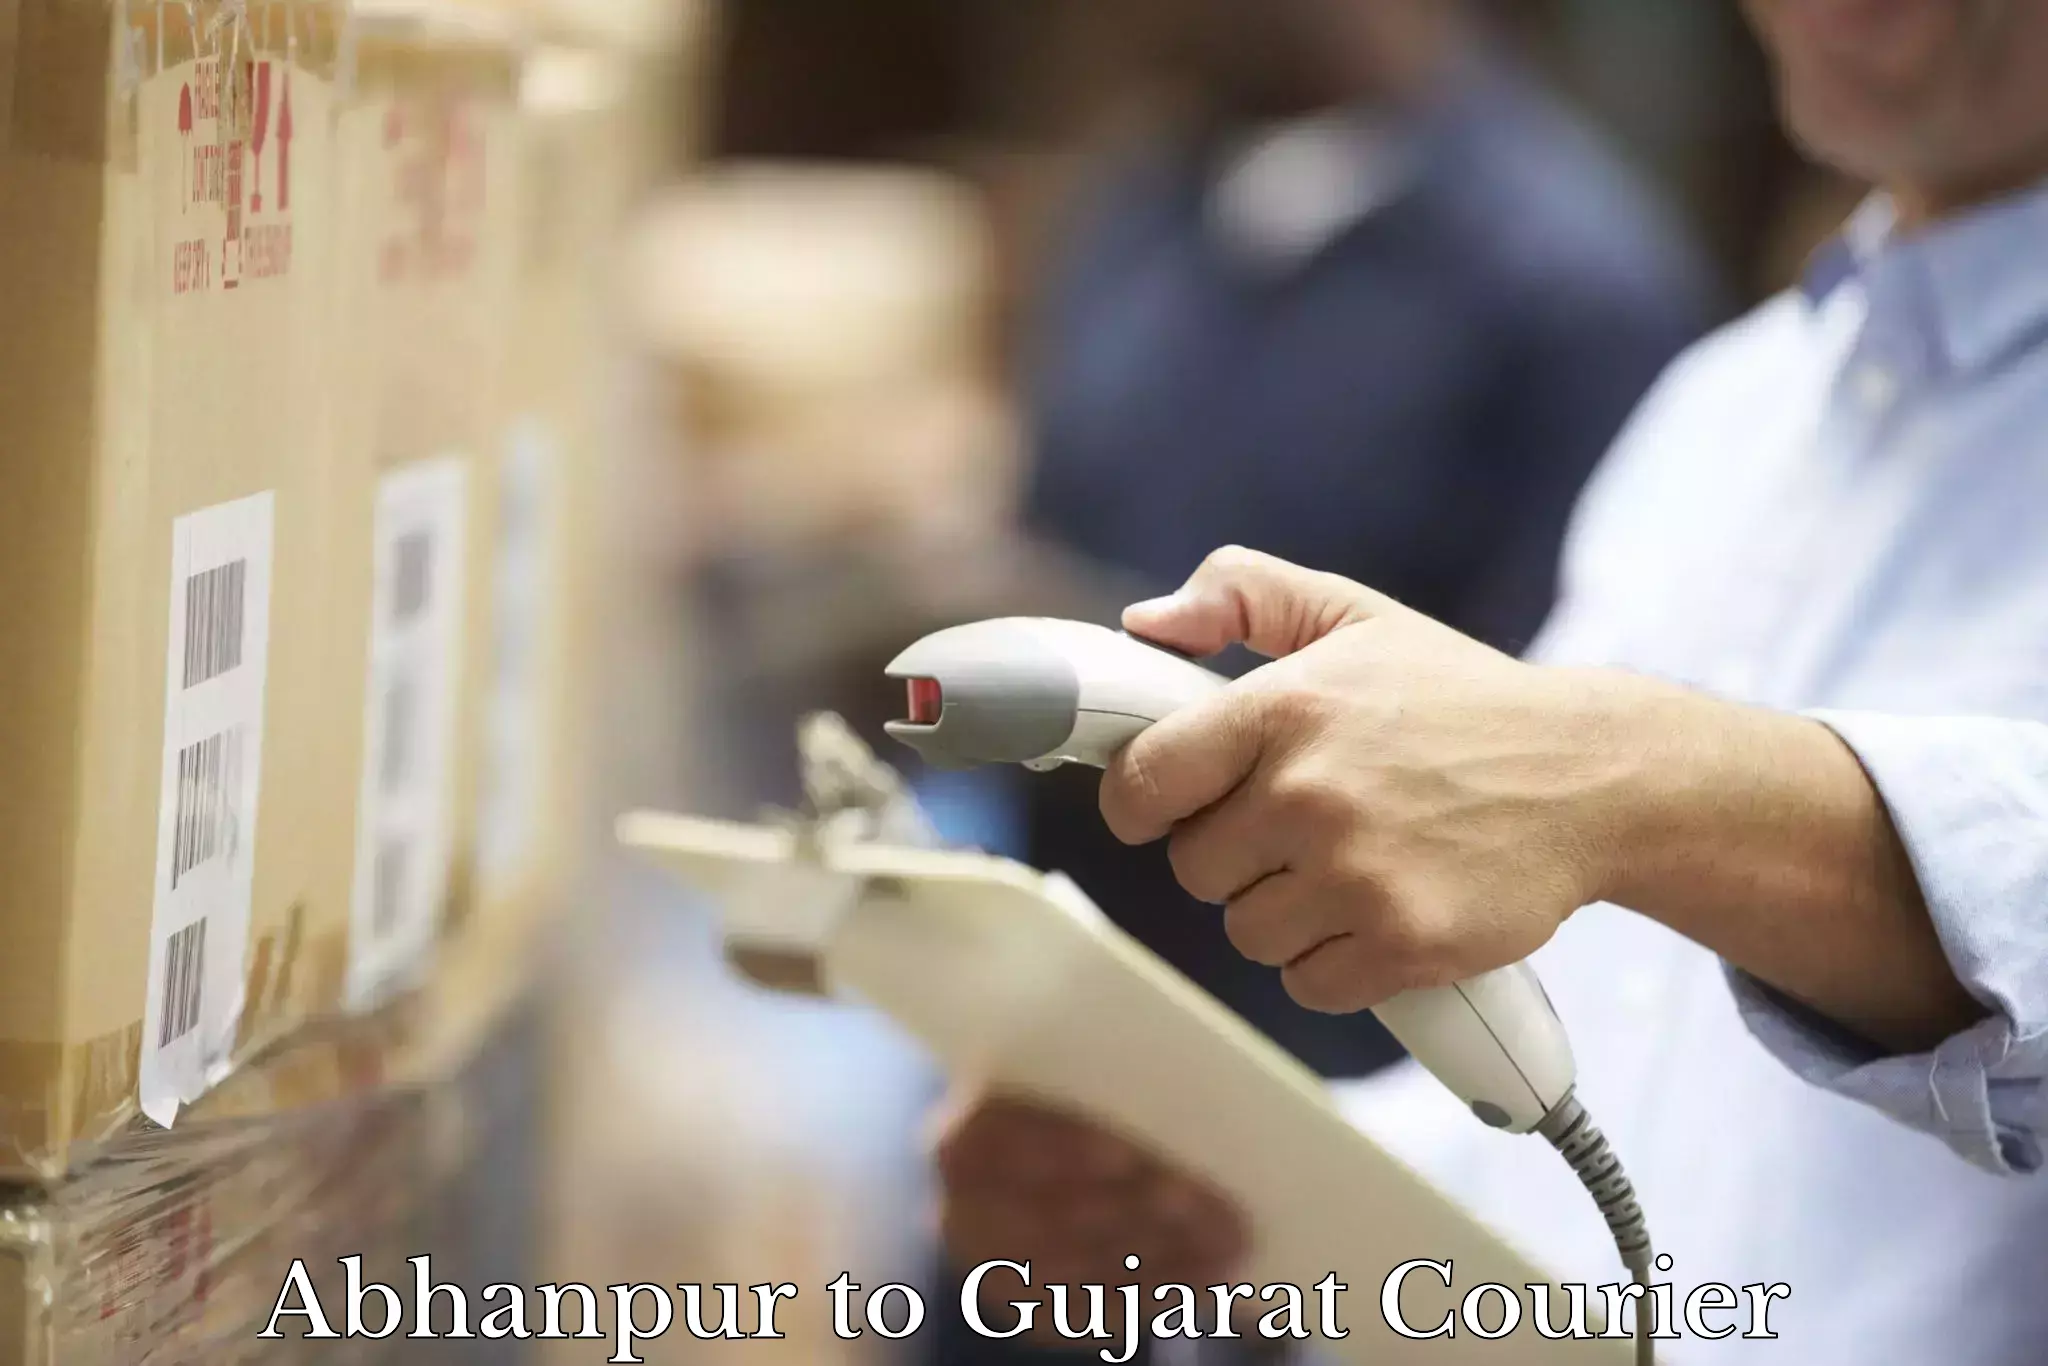 Bulk courier orders Abhanpur to Ahmedabad